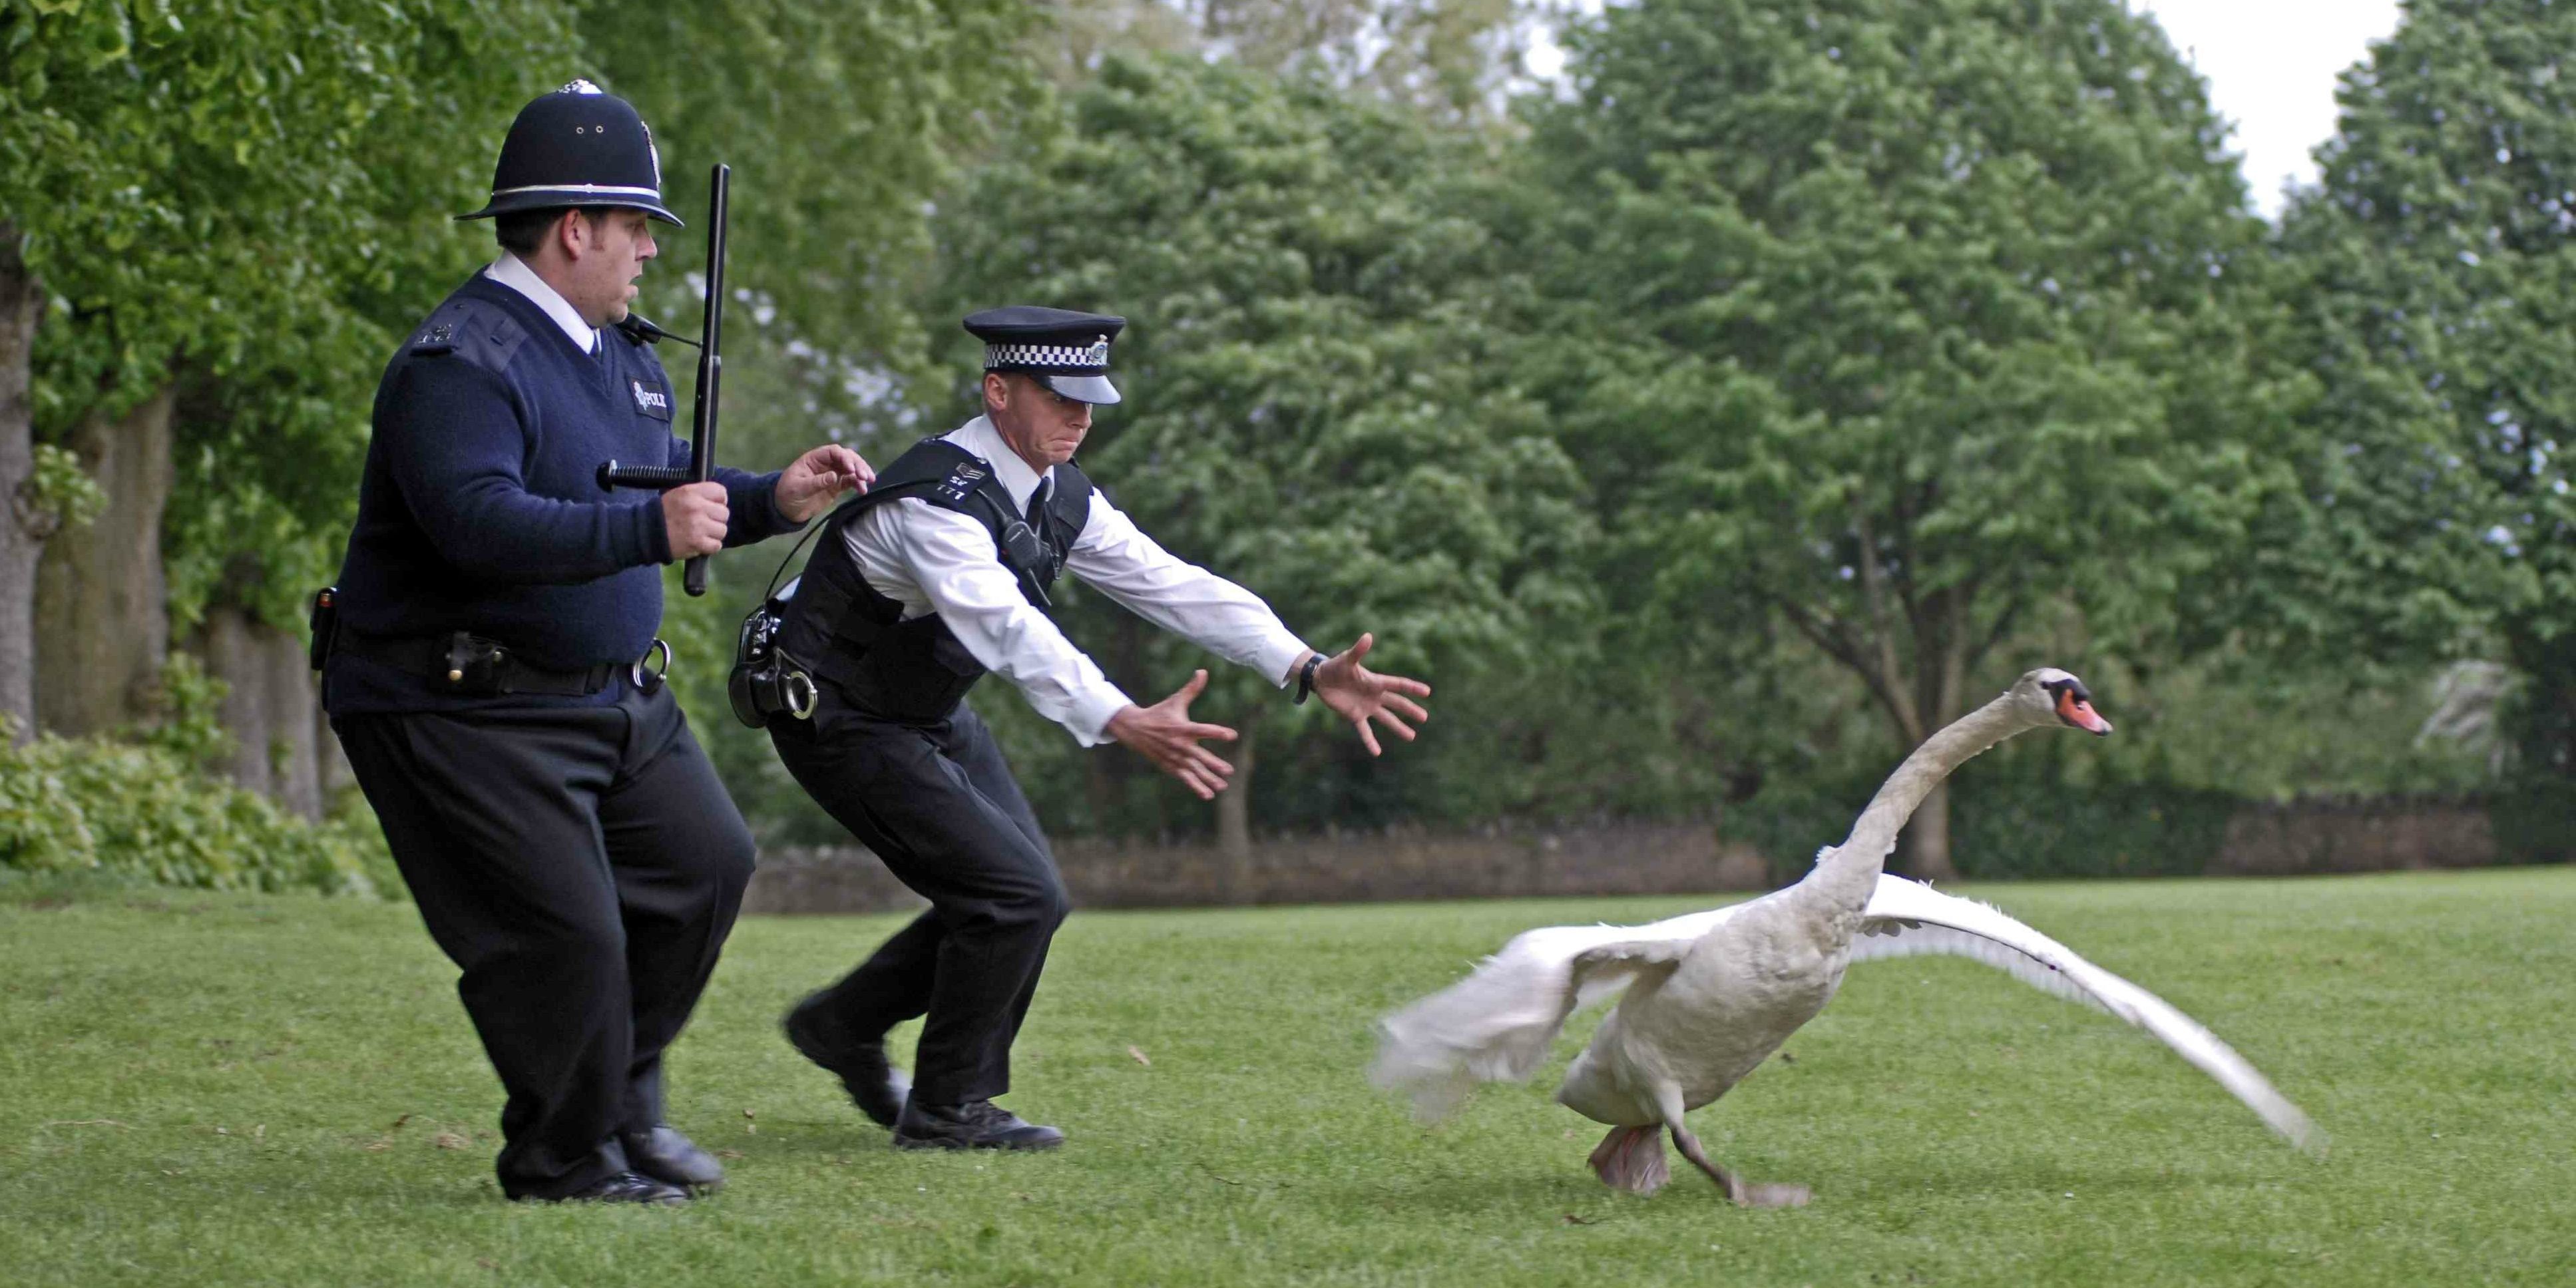 Chasing a swan in Hot Fuzz